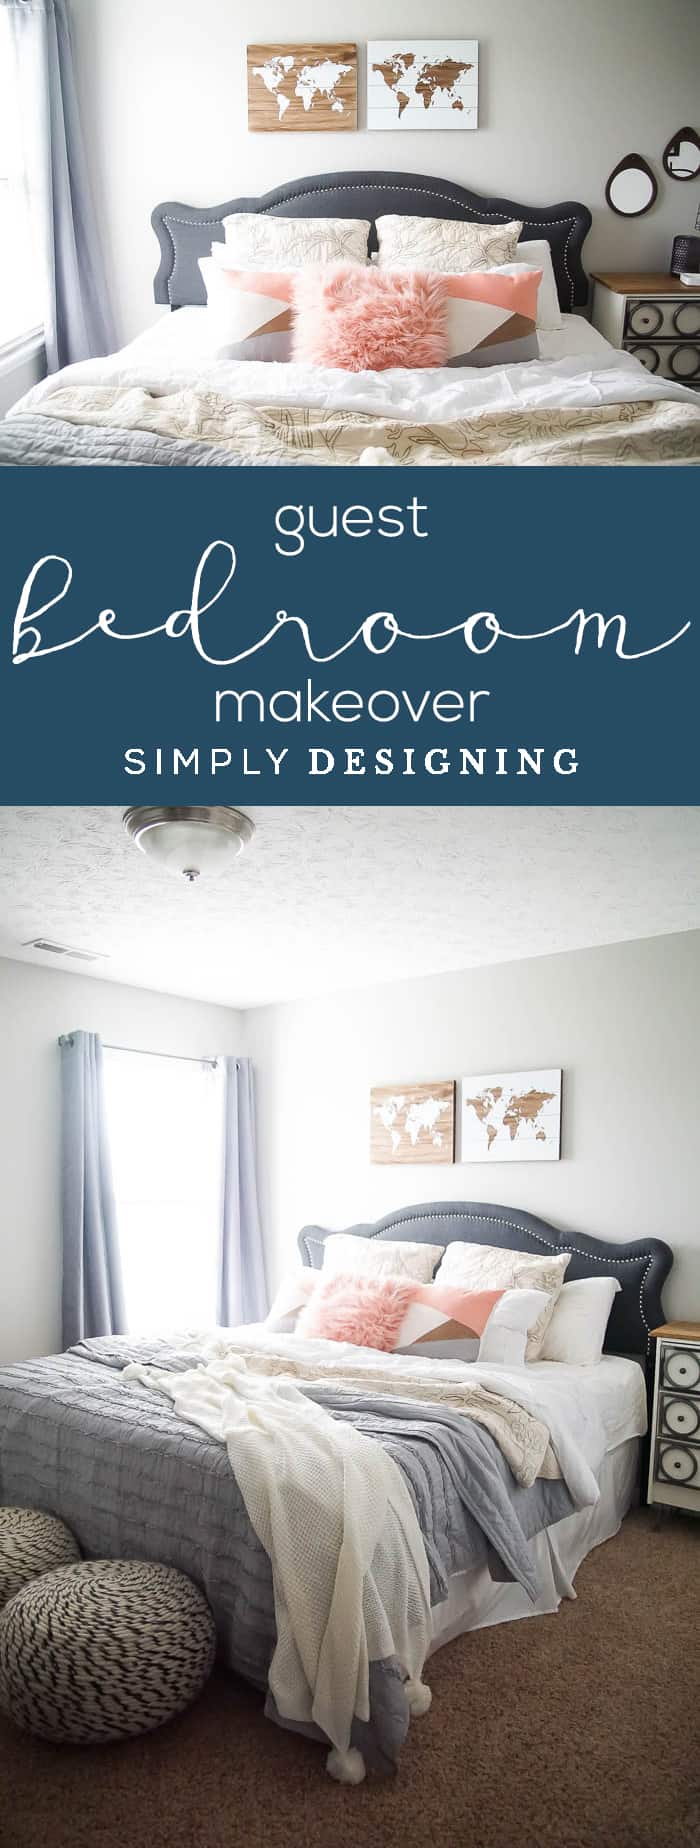 Guest Bedroom Makeover - How to make a Guest Room Comfortable